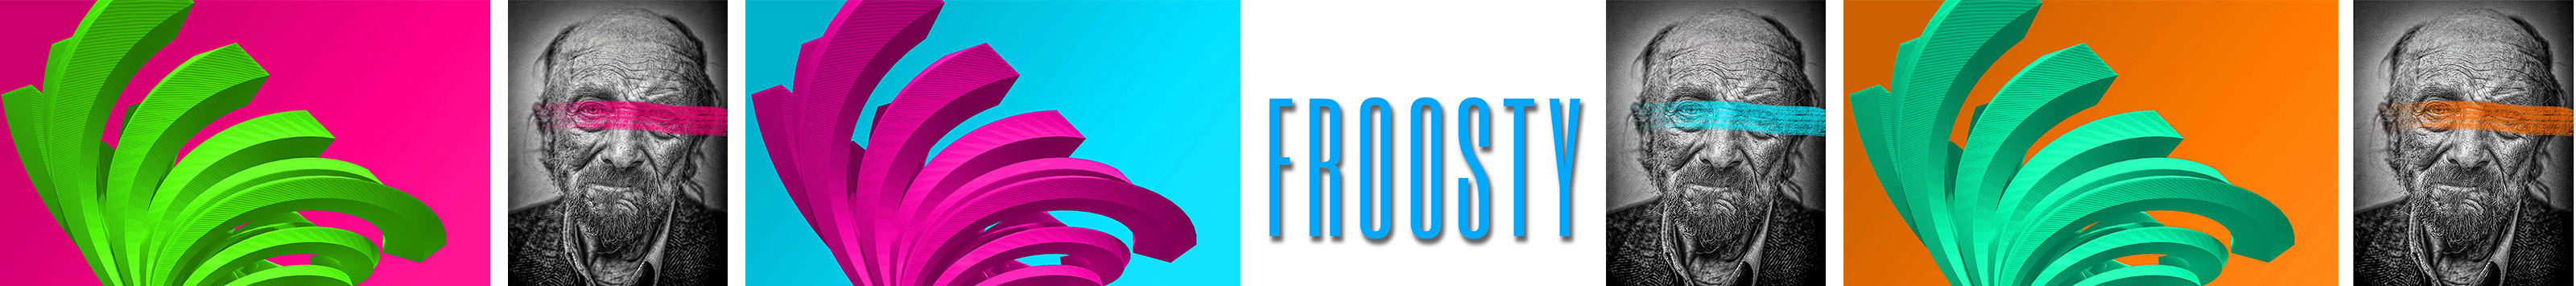 FROOSTY .'s profile banner